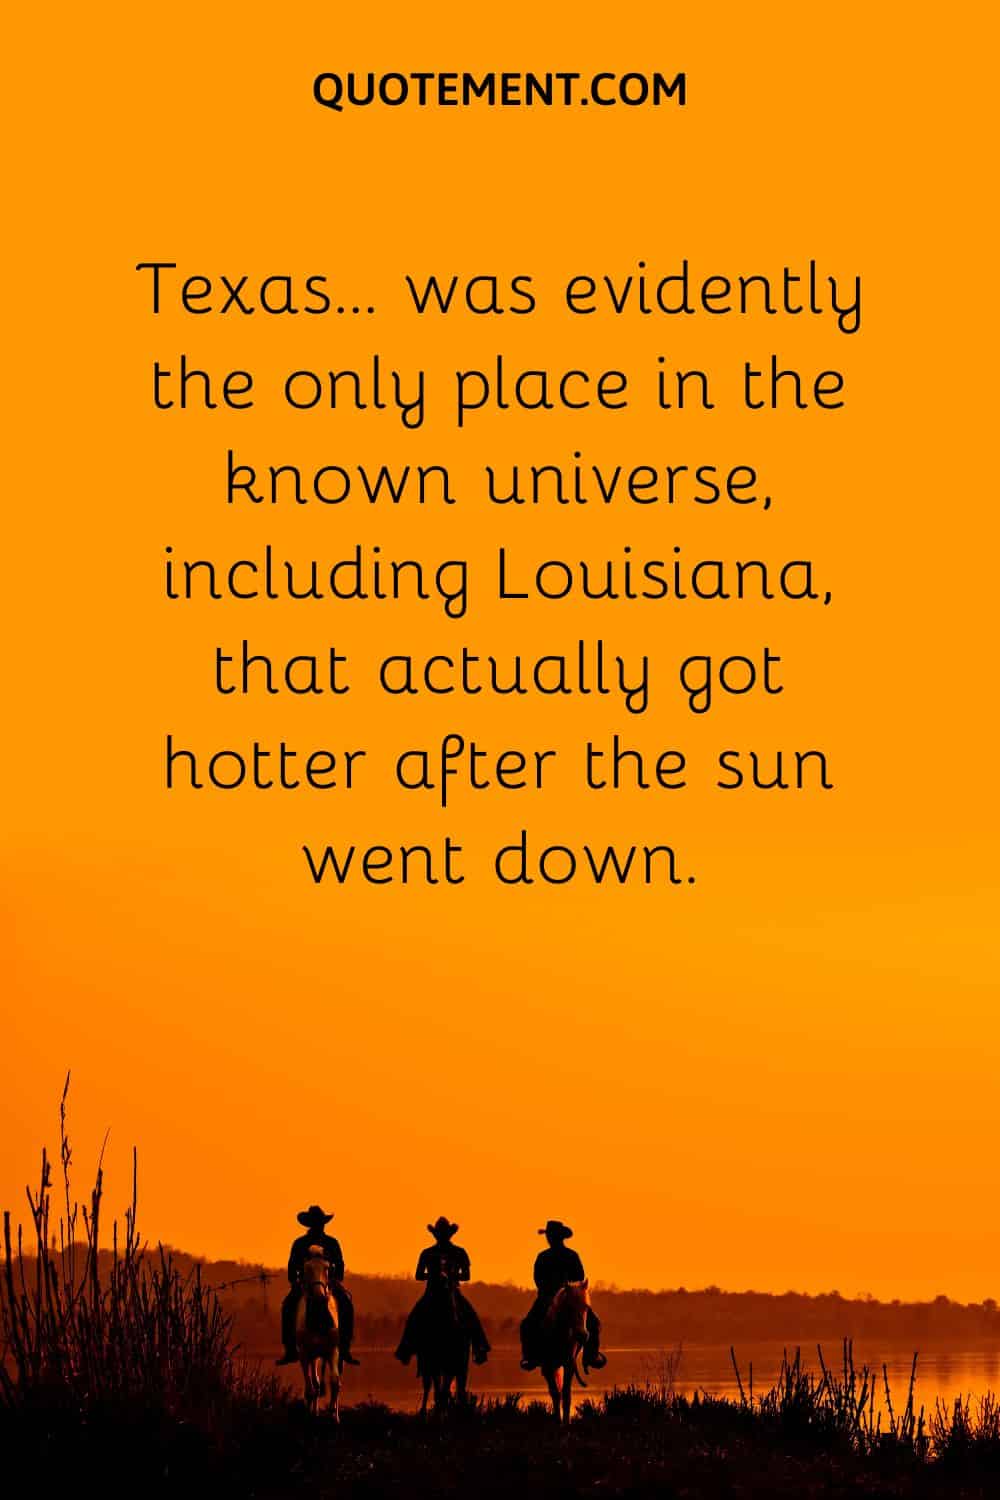 Texas… was evidently the only place in the known universe, including Louisiana, that actually got hotter after the sun went down.